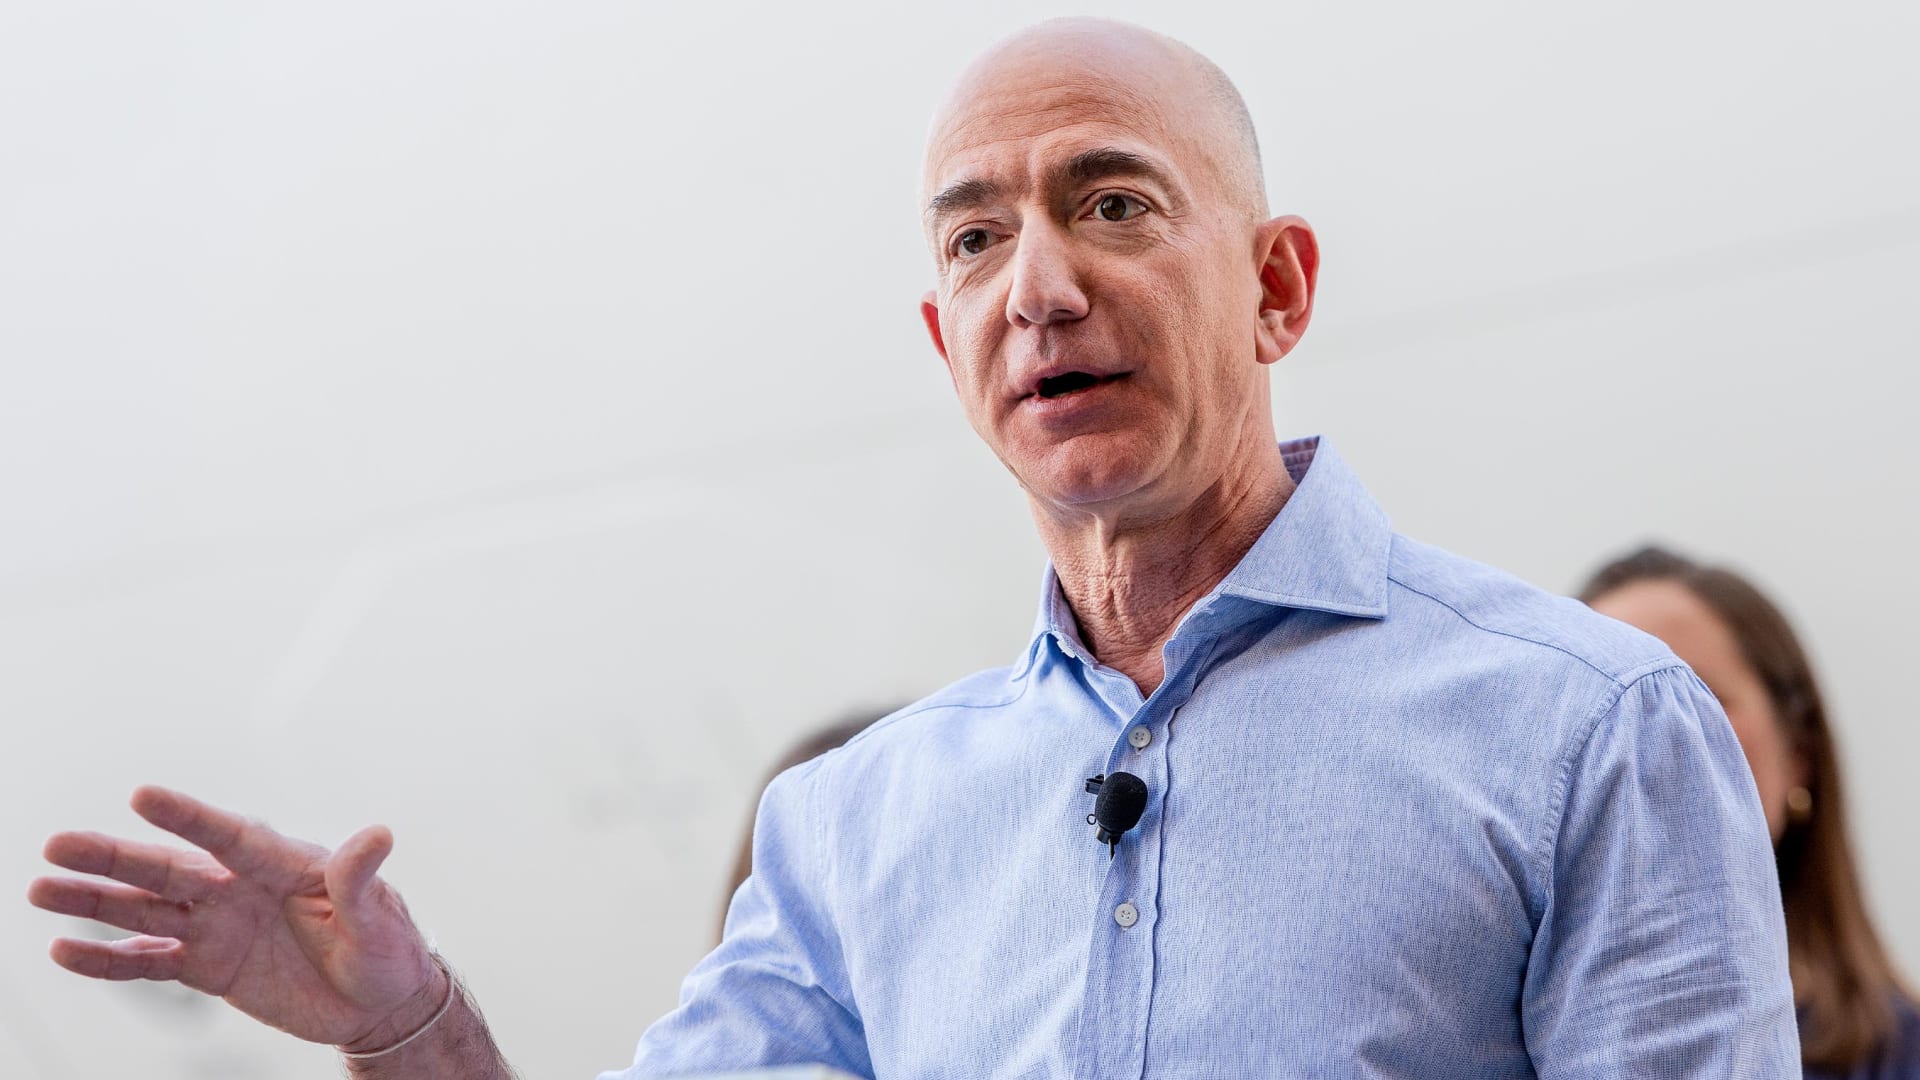 A Tip From Jeff Bezos: No Doesn't Always Mean No